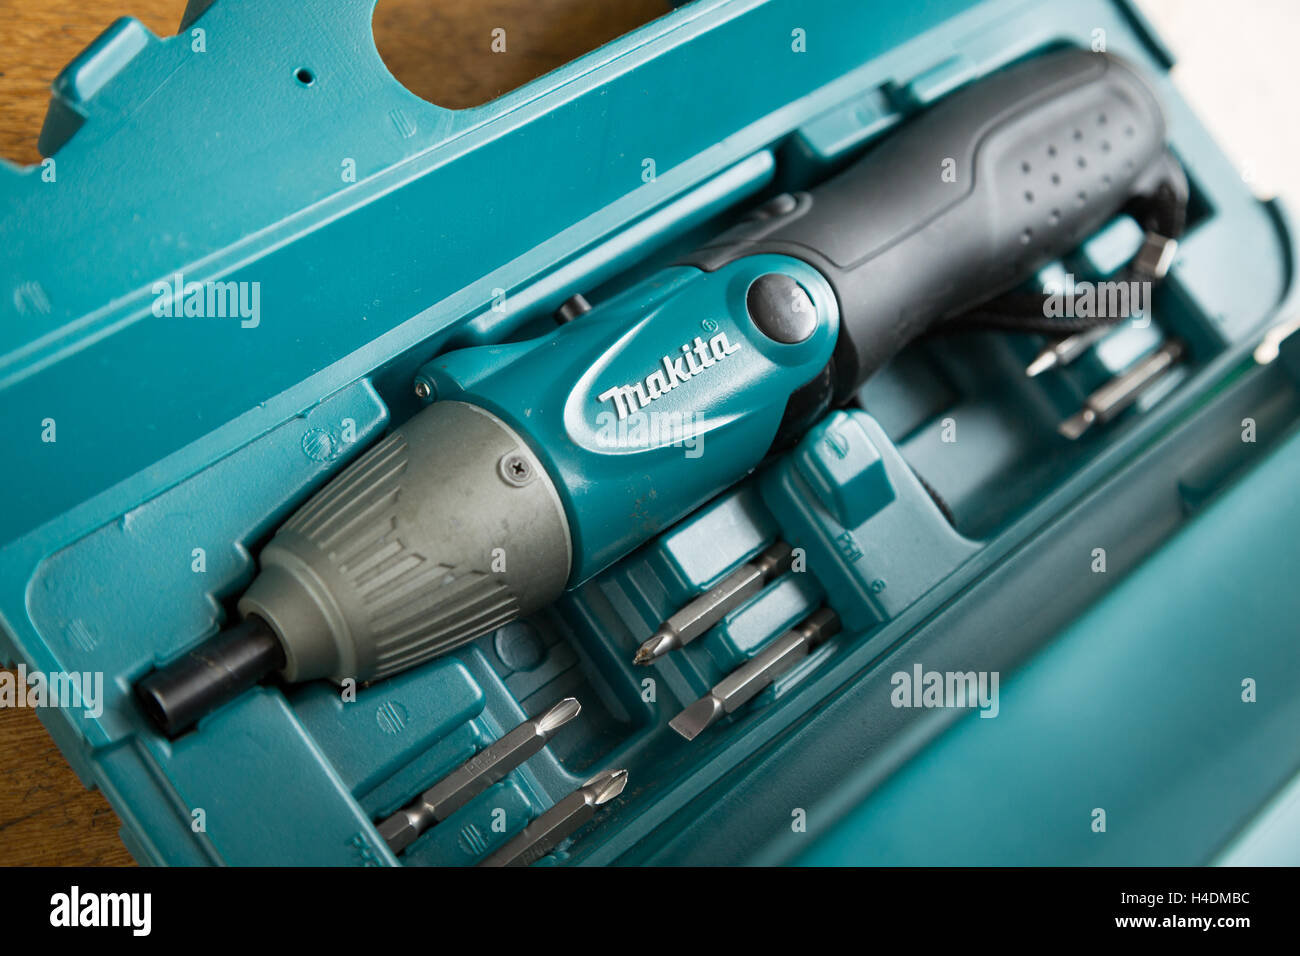 Old Makita cordless screwdriver kit with accessories Stock Photo - Alamy